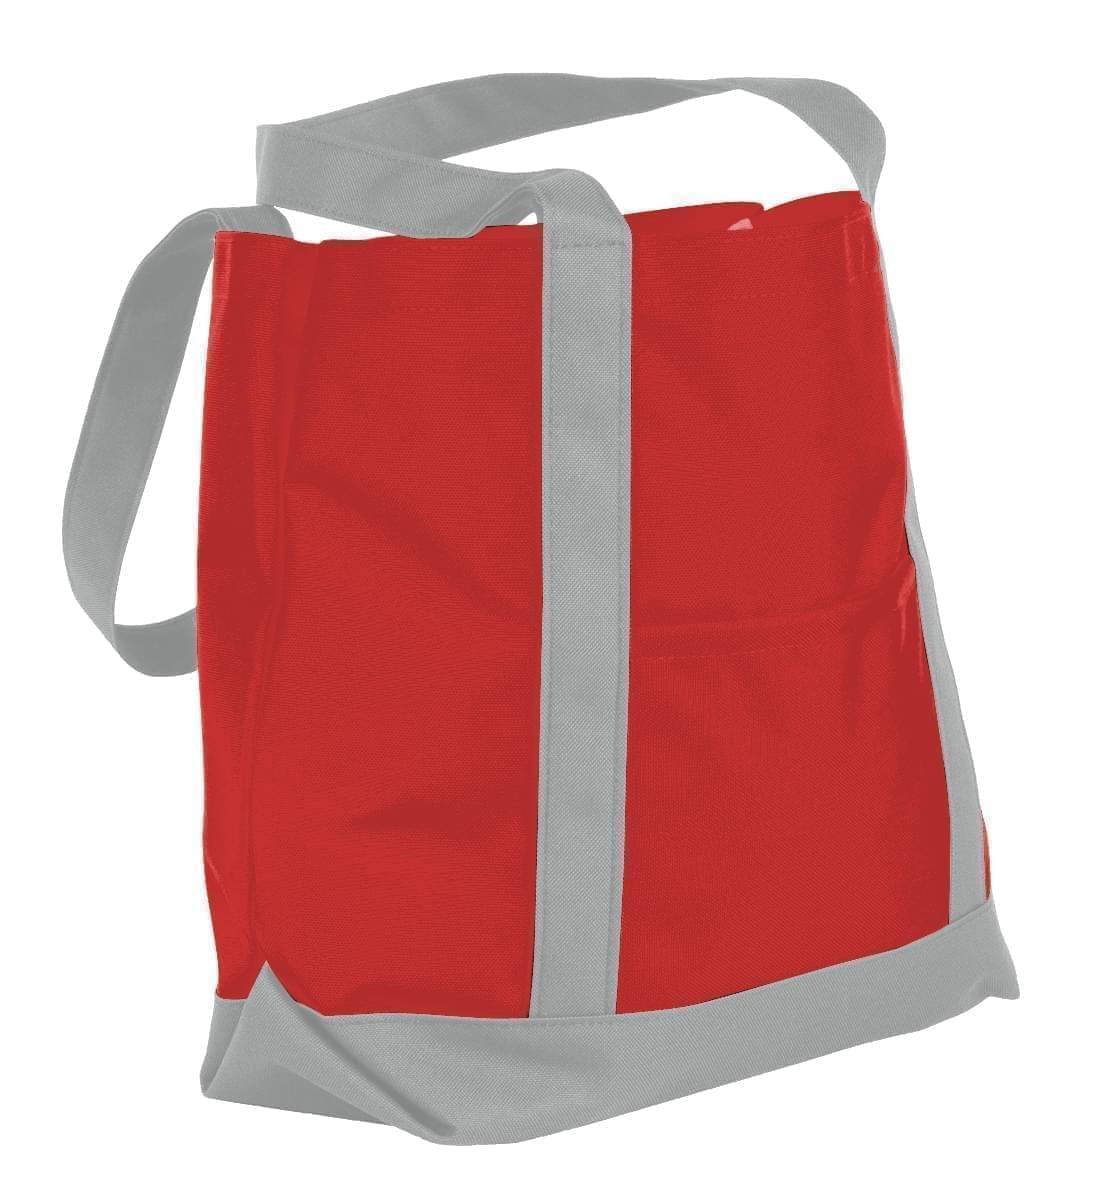 USA Made Nylon Poly Boat Tote Bags, Red-Grey, XAACL1UAZN